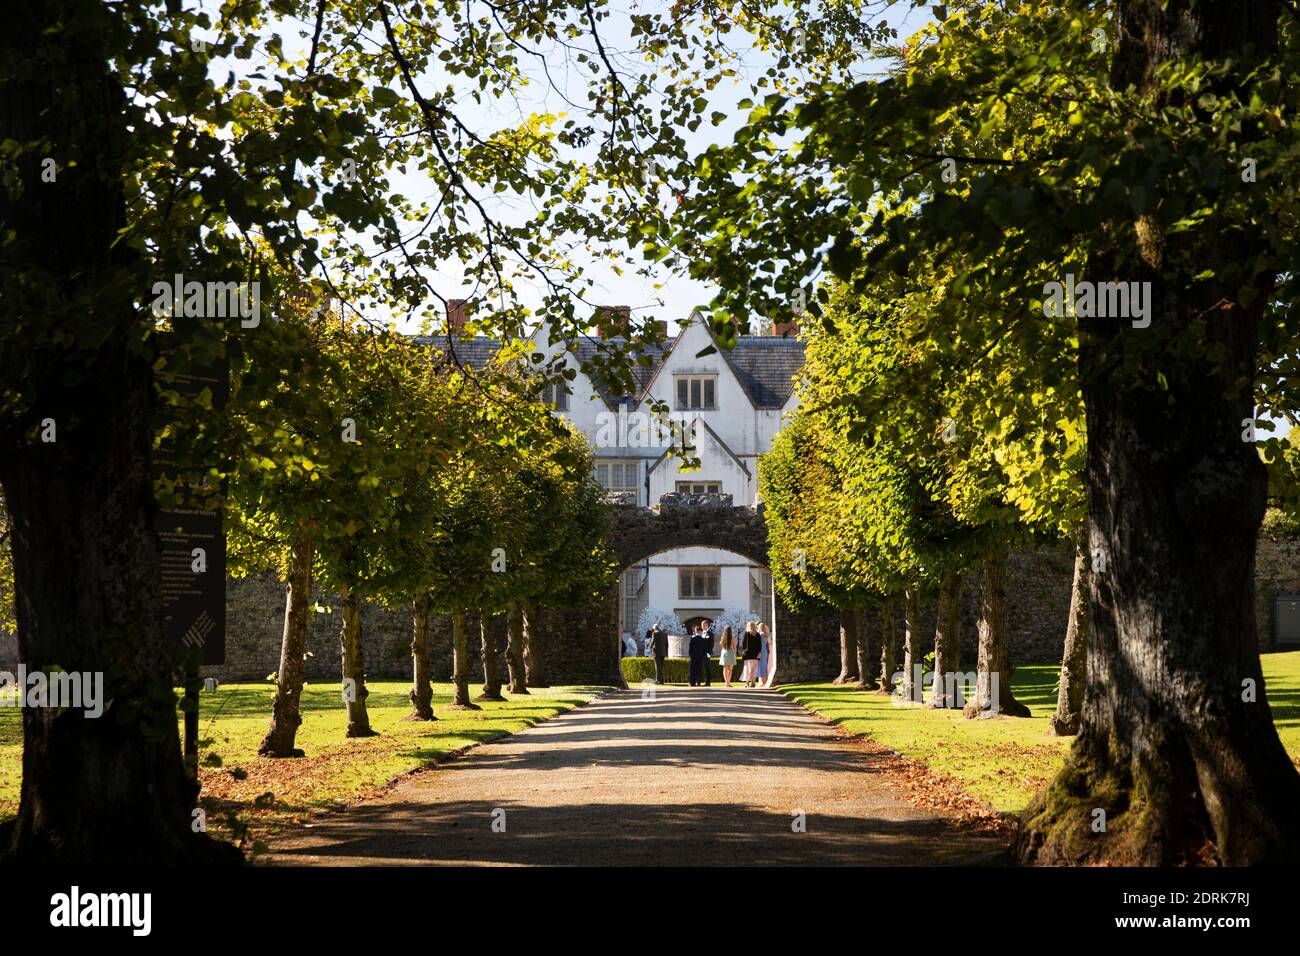 Cf184UK, Wales, Cardiff, St Fagans, National Museum of History, wedding guests in castle courtyard Stock Photo